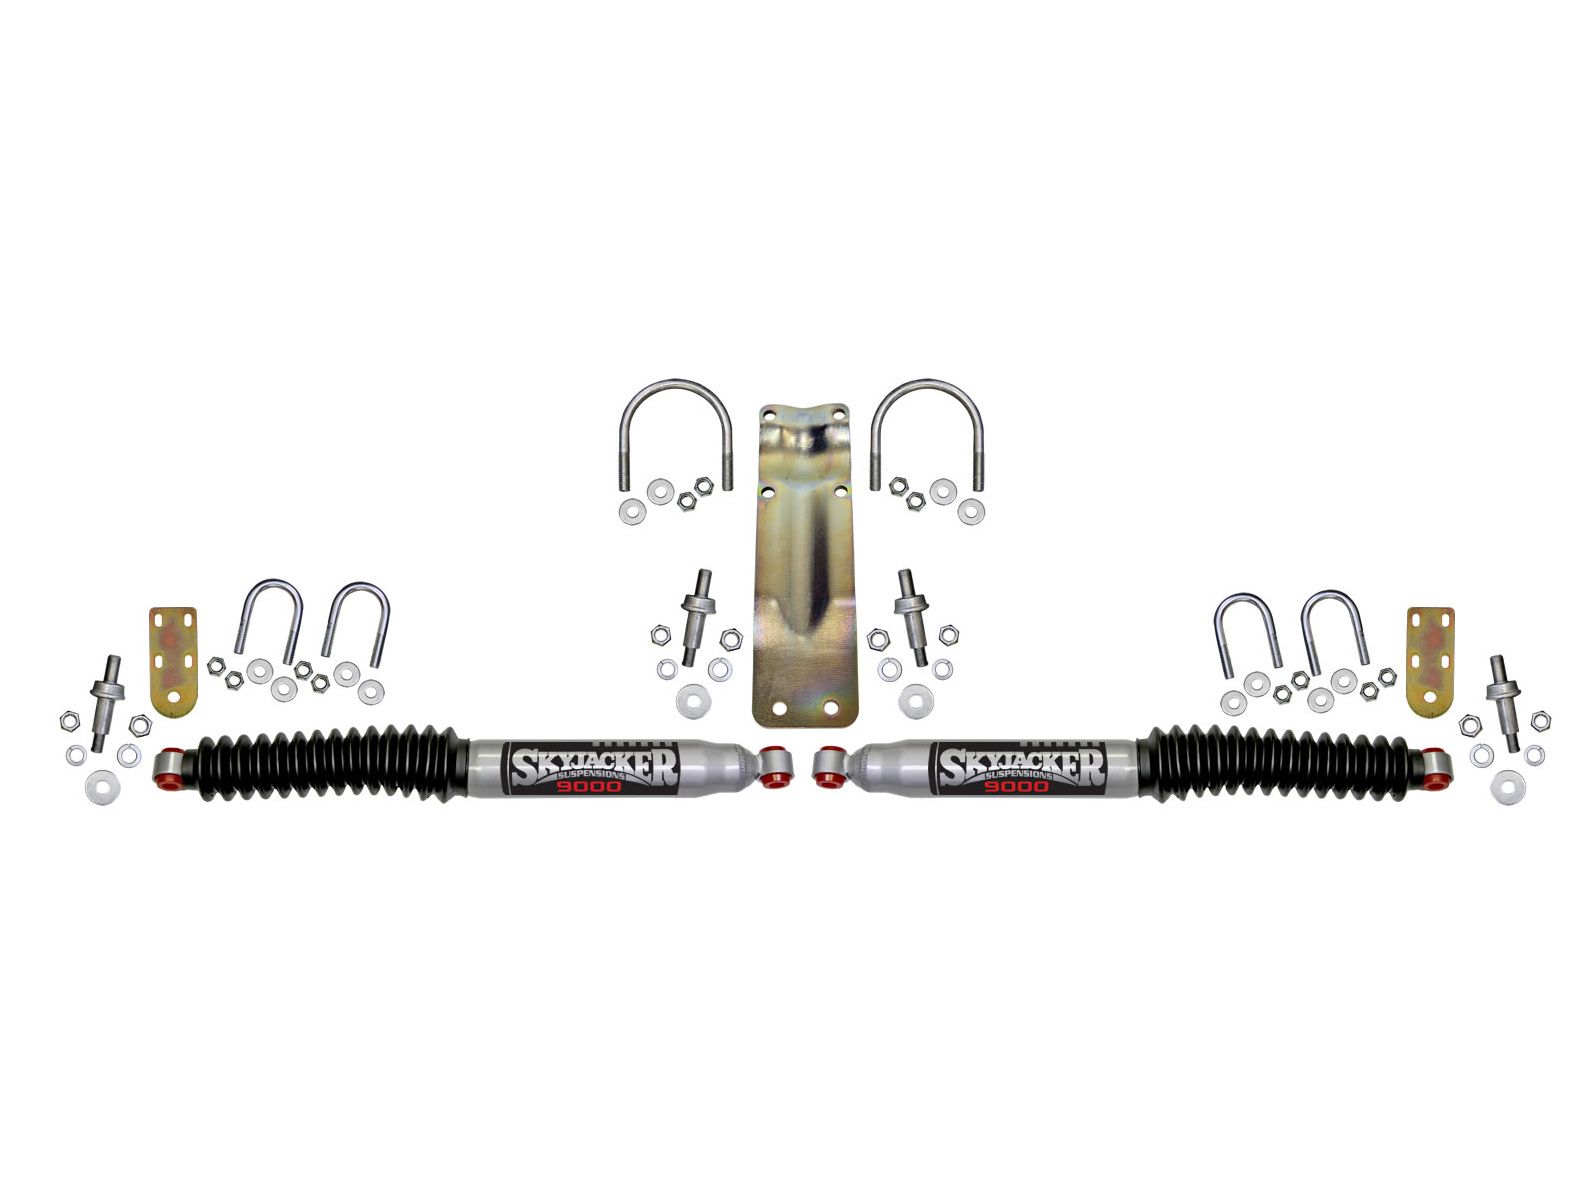 Ramcharger 1974-1993 Dodge 4WD Silver 900 Dual Steering Stabilizer Kit by Skyjacker